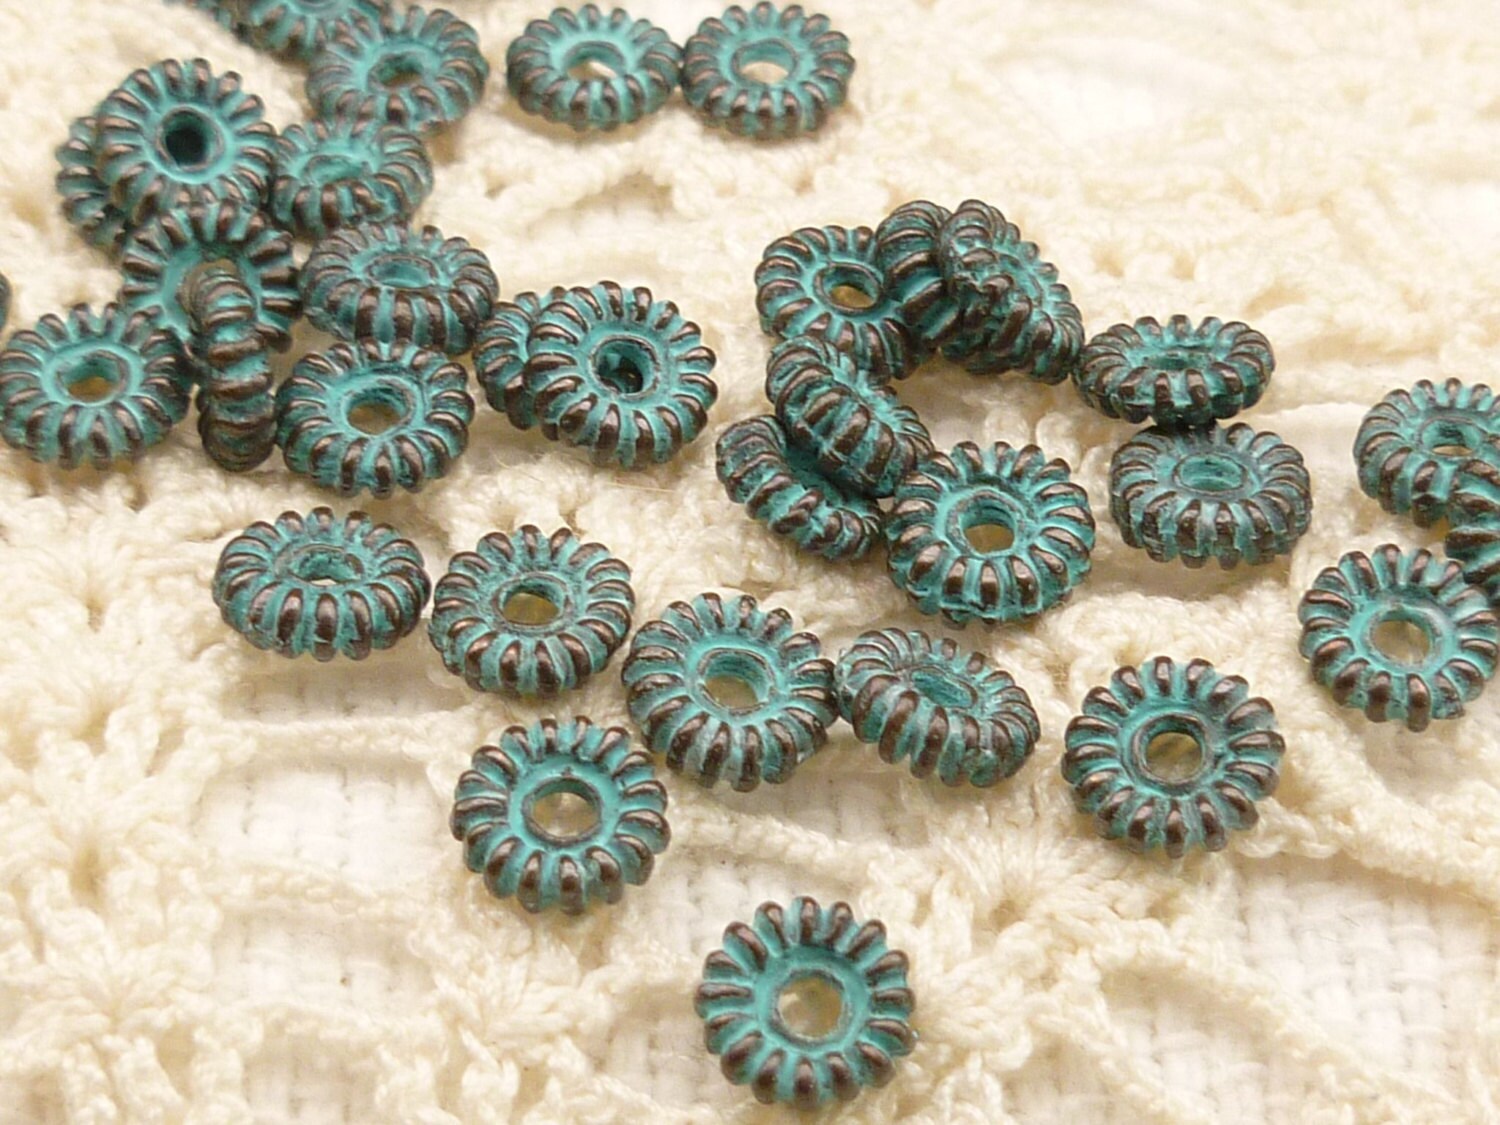 6mm Grover Daisy Spacer Beads Rustic Patina Beads Mykonos - Etsy